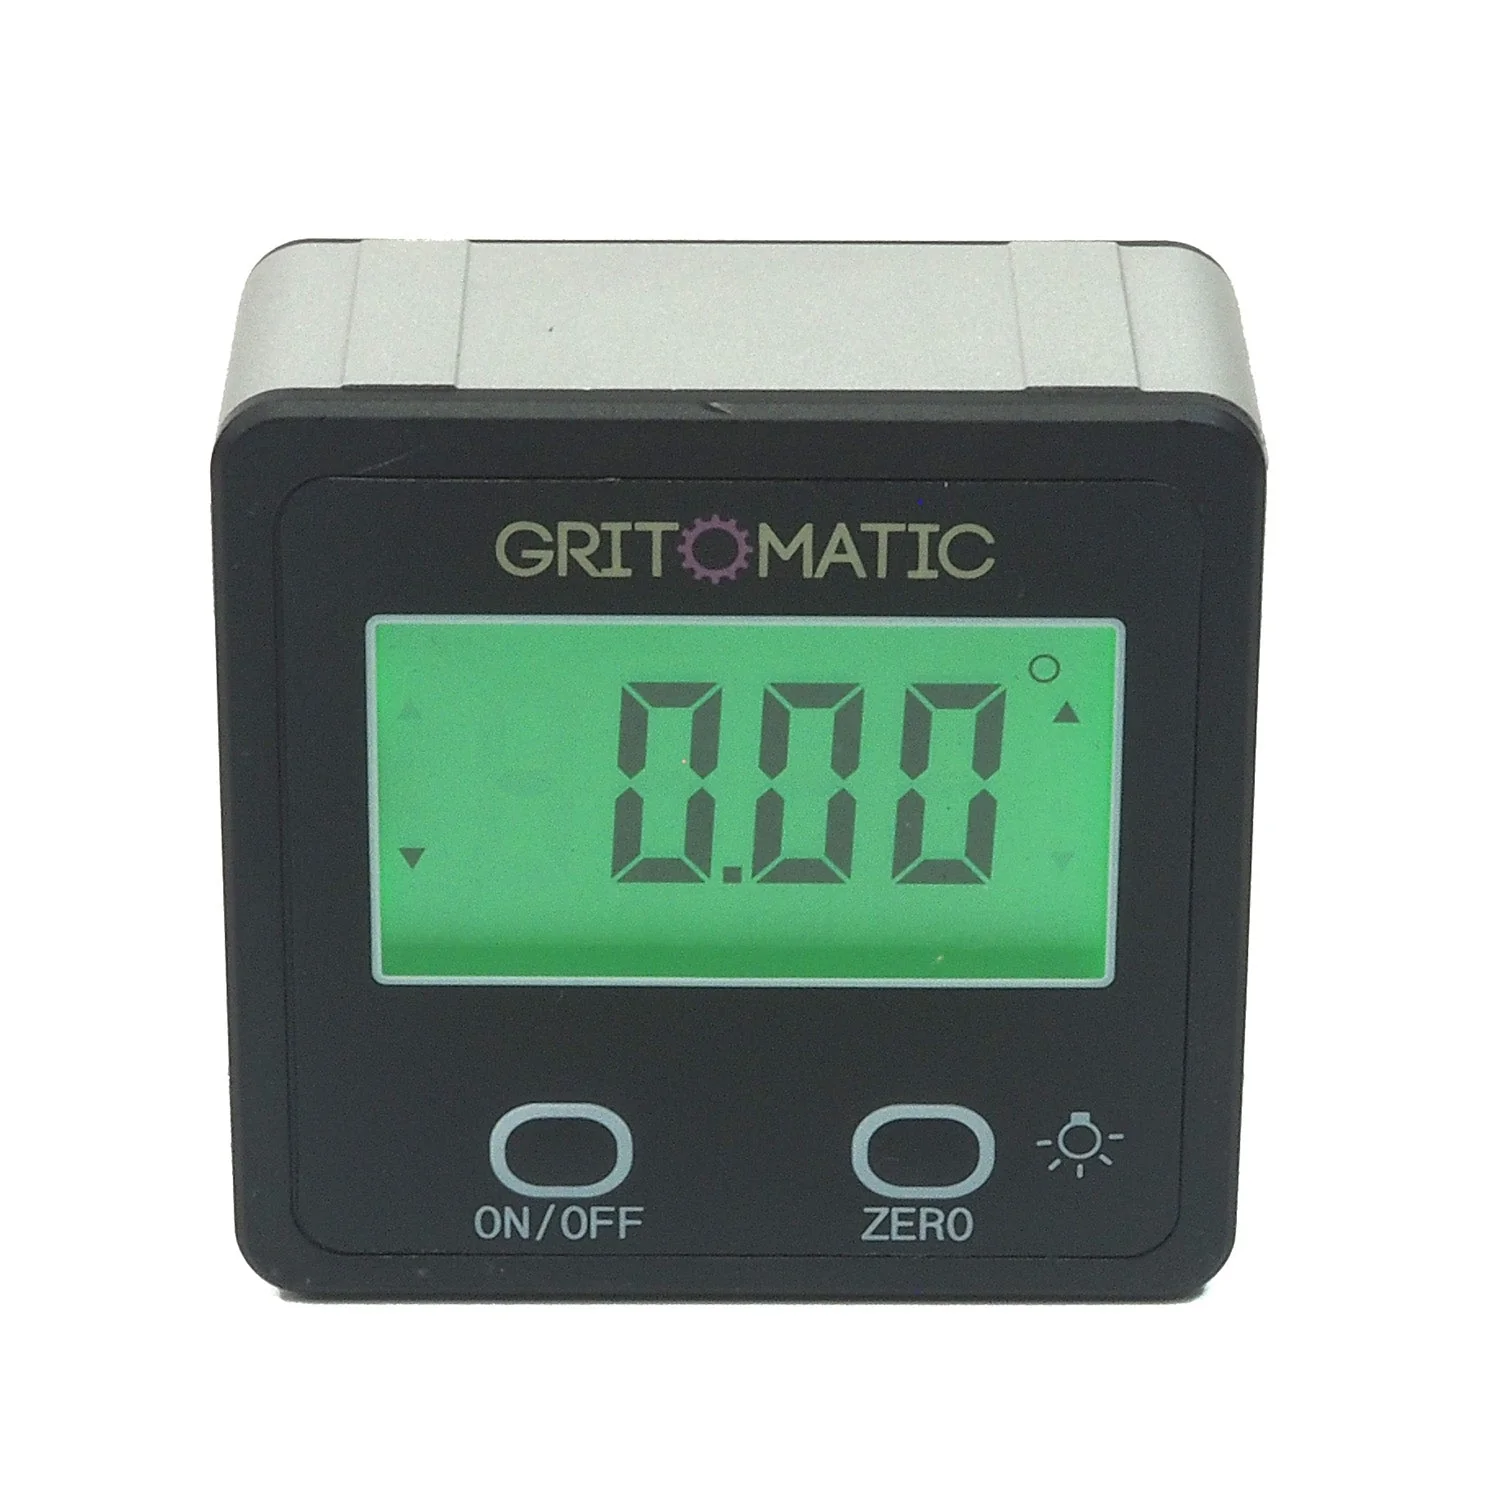 Do you have video on using  Digital Angle Gauge?